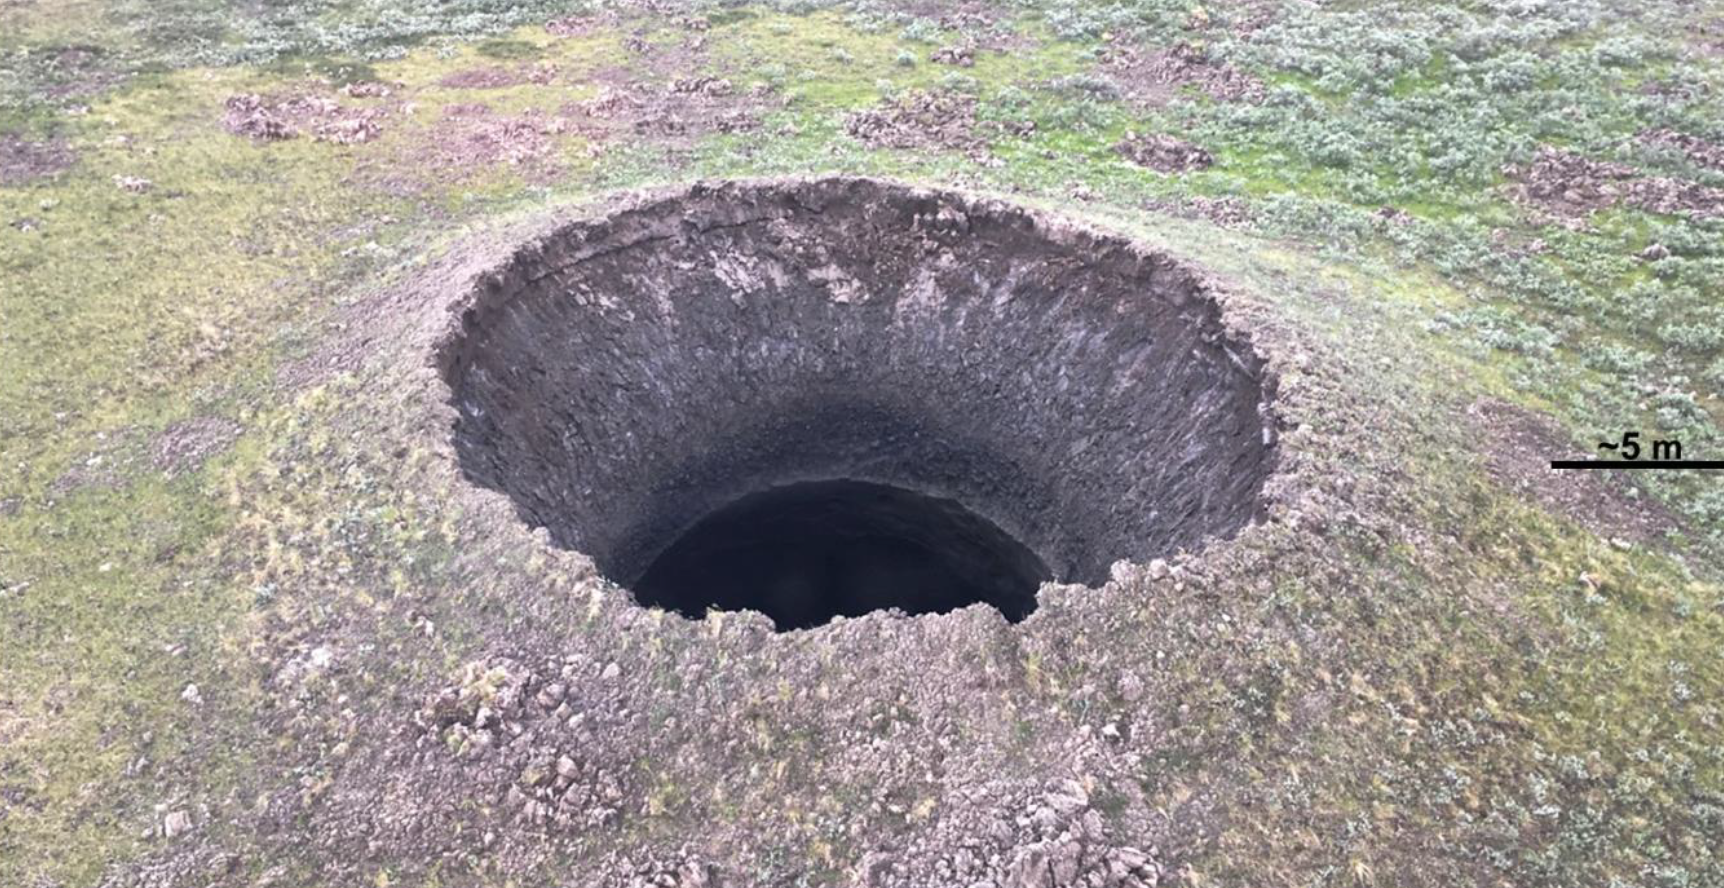 A photo of the C17 crater on the day it was discovered, July 16, 2020. (Image: Andrey Umnikov)